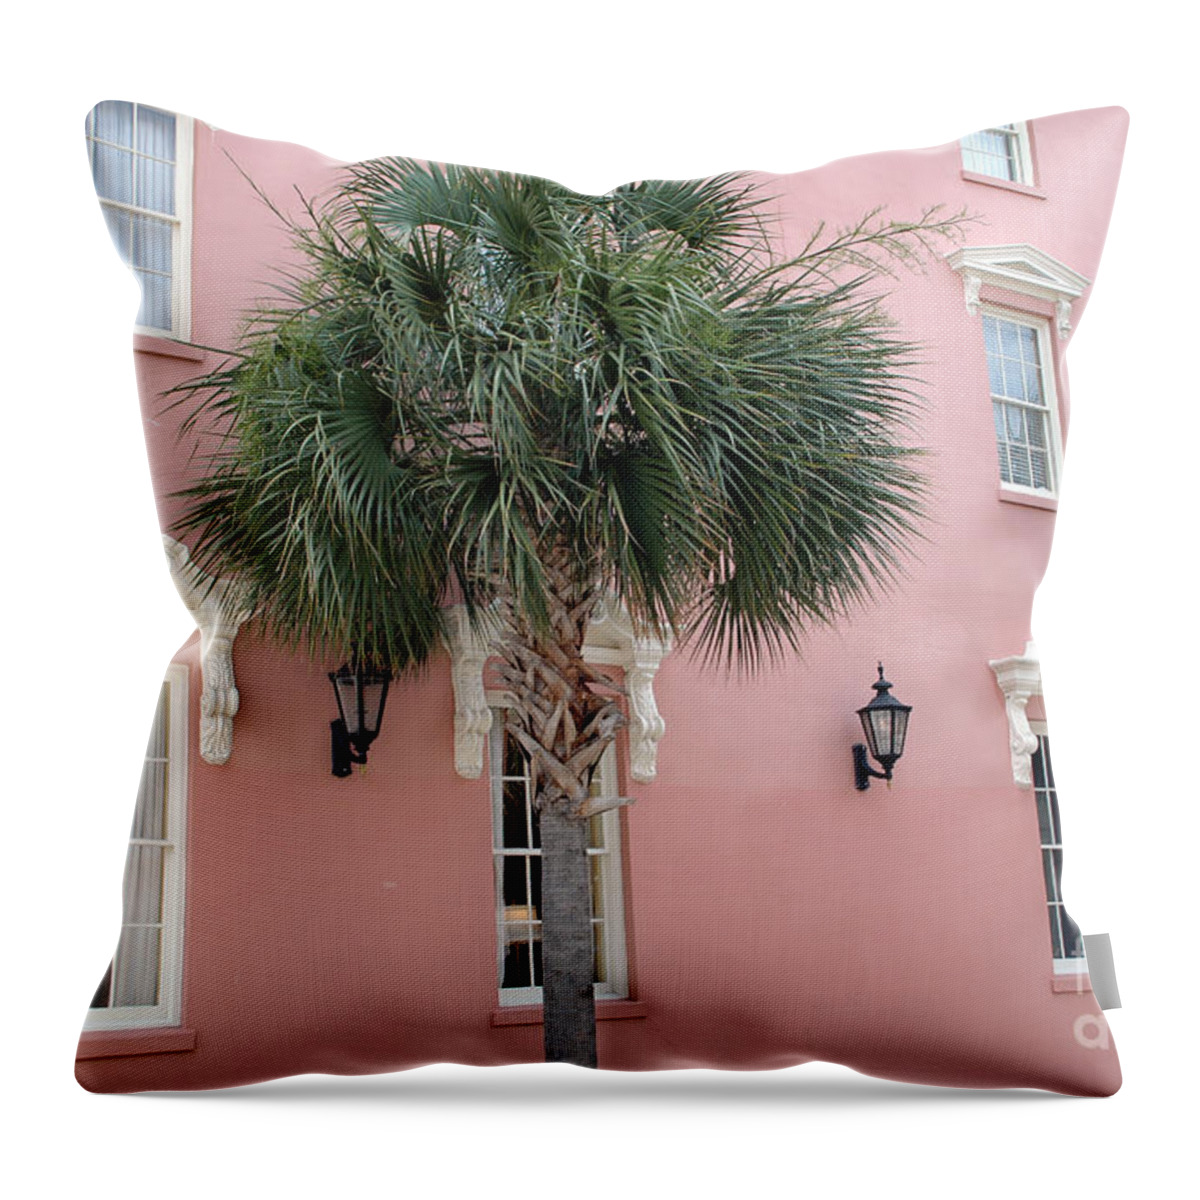 Charleston Houses Throw Pillow featuring the photograph Charleston South Carolina Pink Architecture Historical District - The Mills House by Kathy Fornal